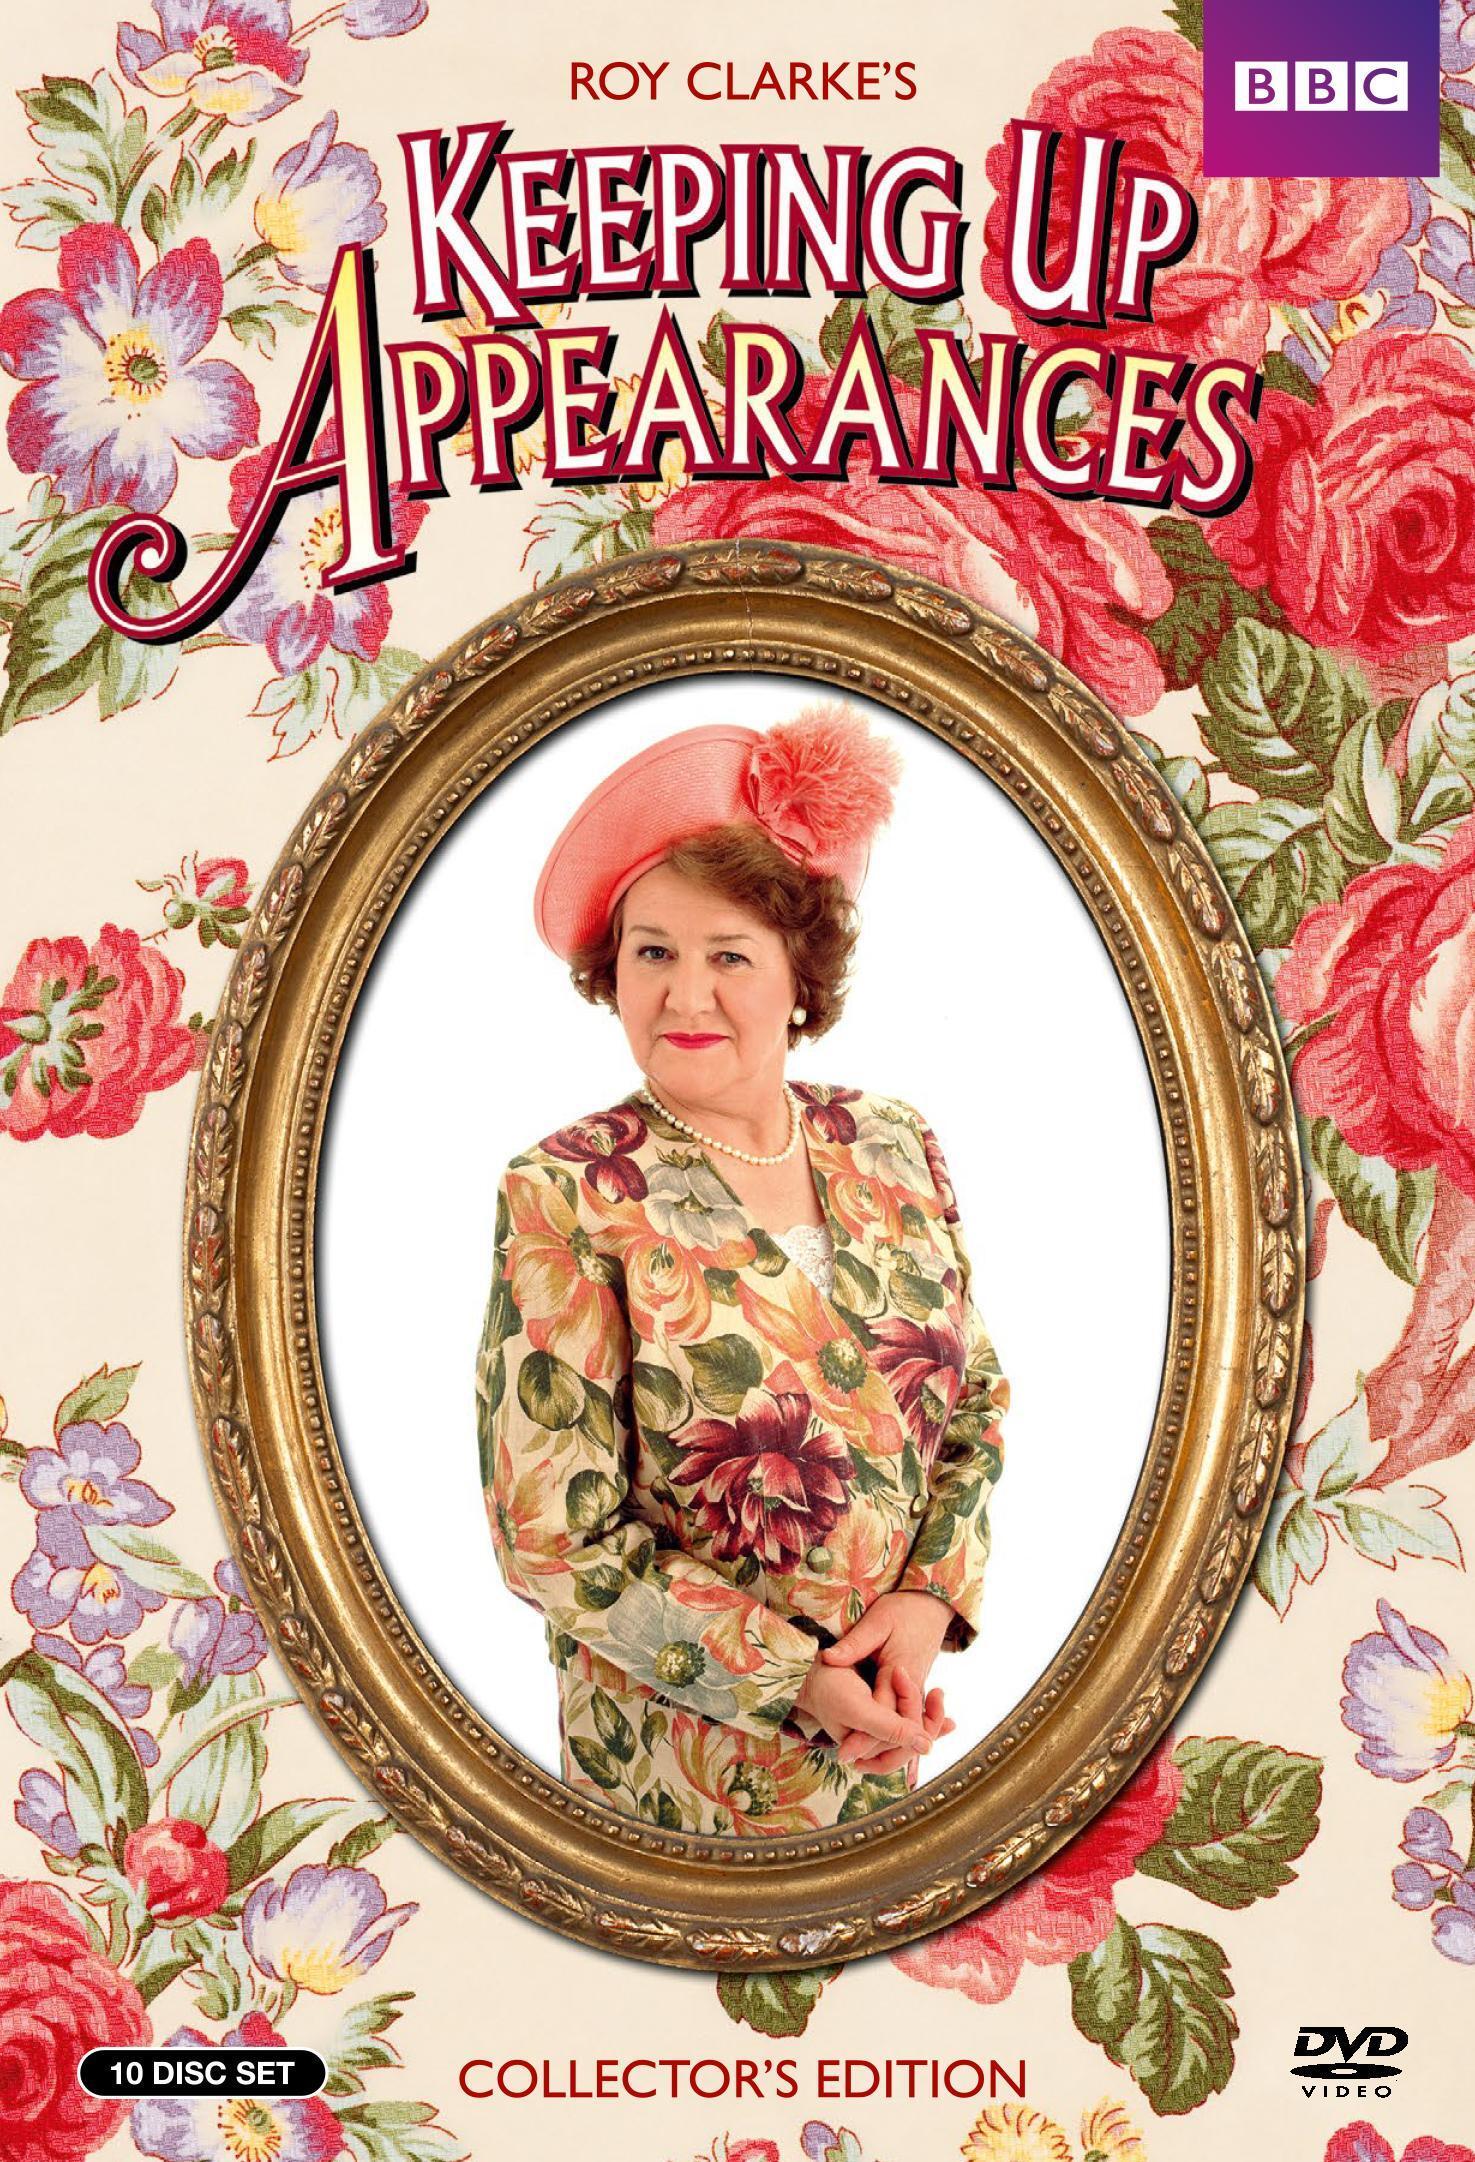 Keeping Up Appearances: The Complete Collection (Box Set) - DVD [ 1995 ]  - Comedy Television On DVD - TV Shows On GRUV